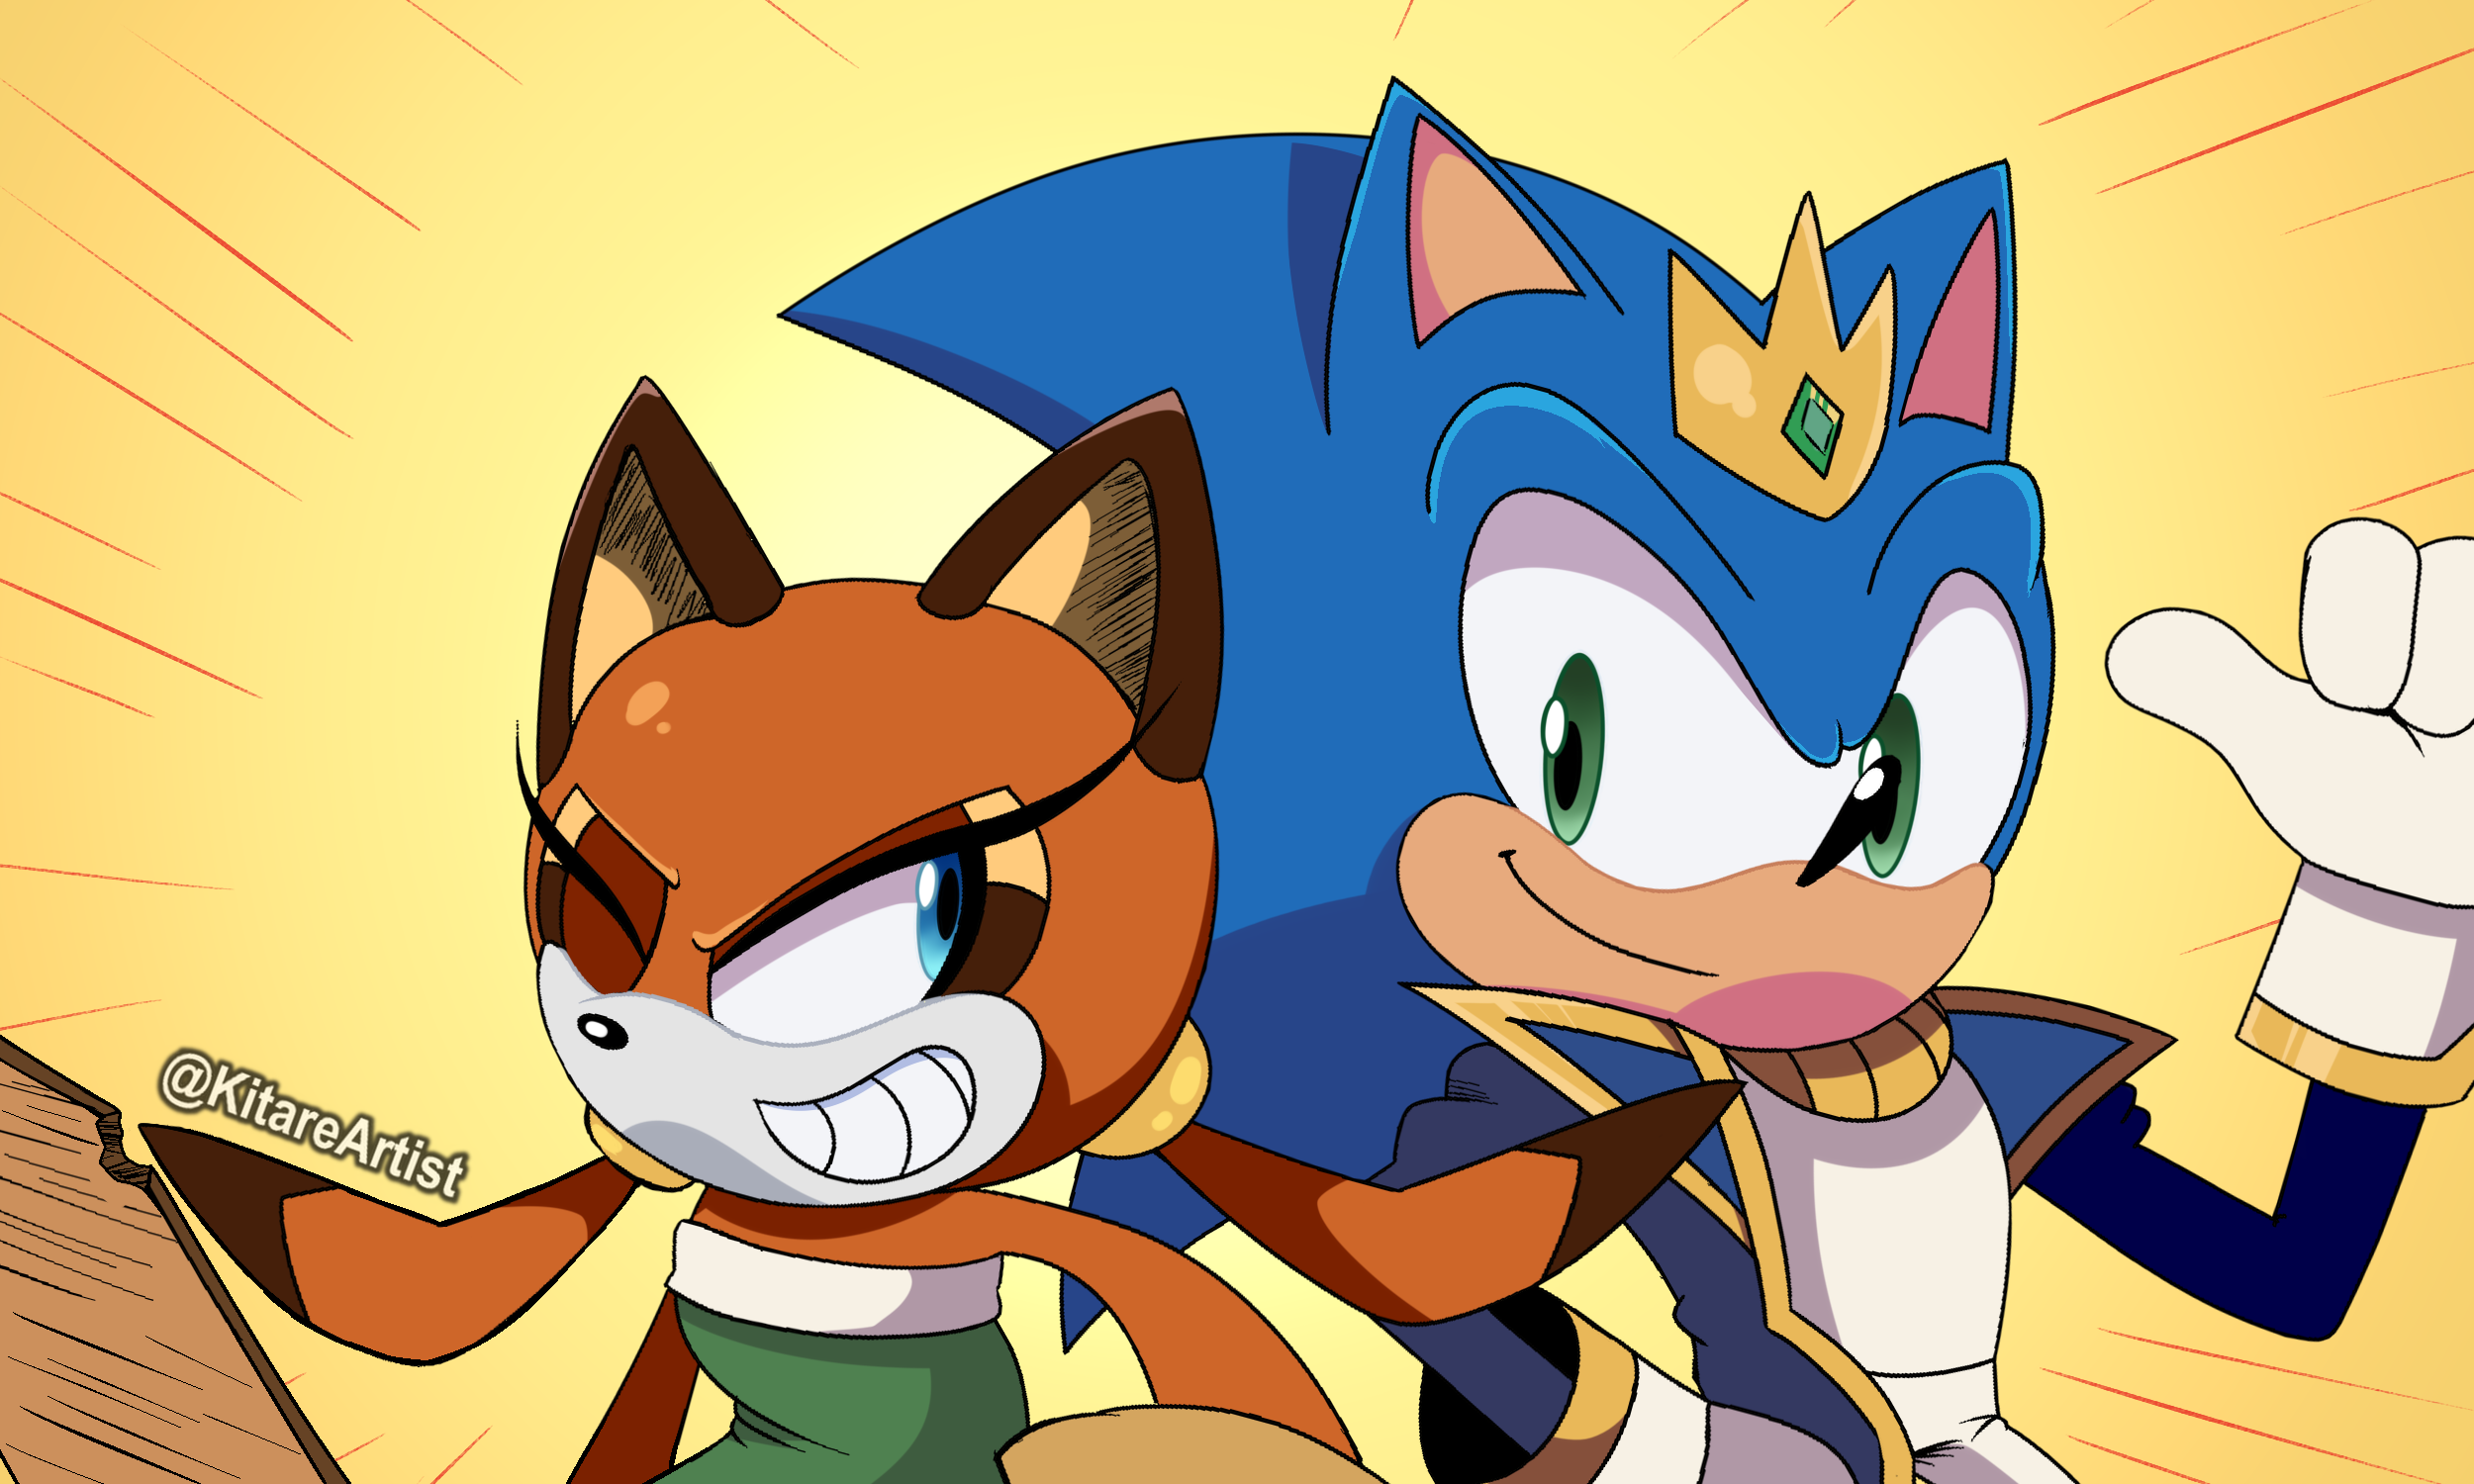 Mighty Expressions by SailorMoonAndSonicX on DeviantArt